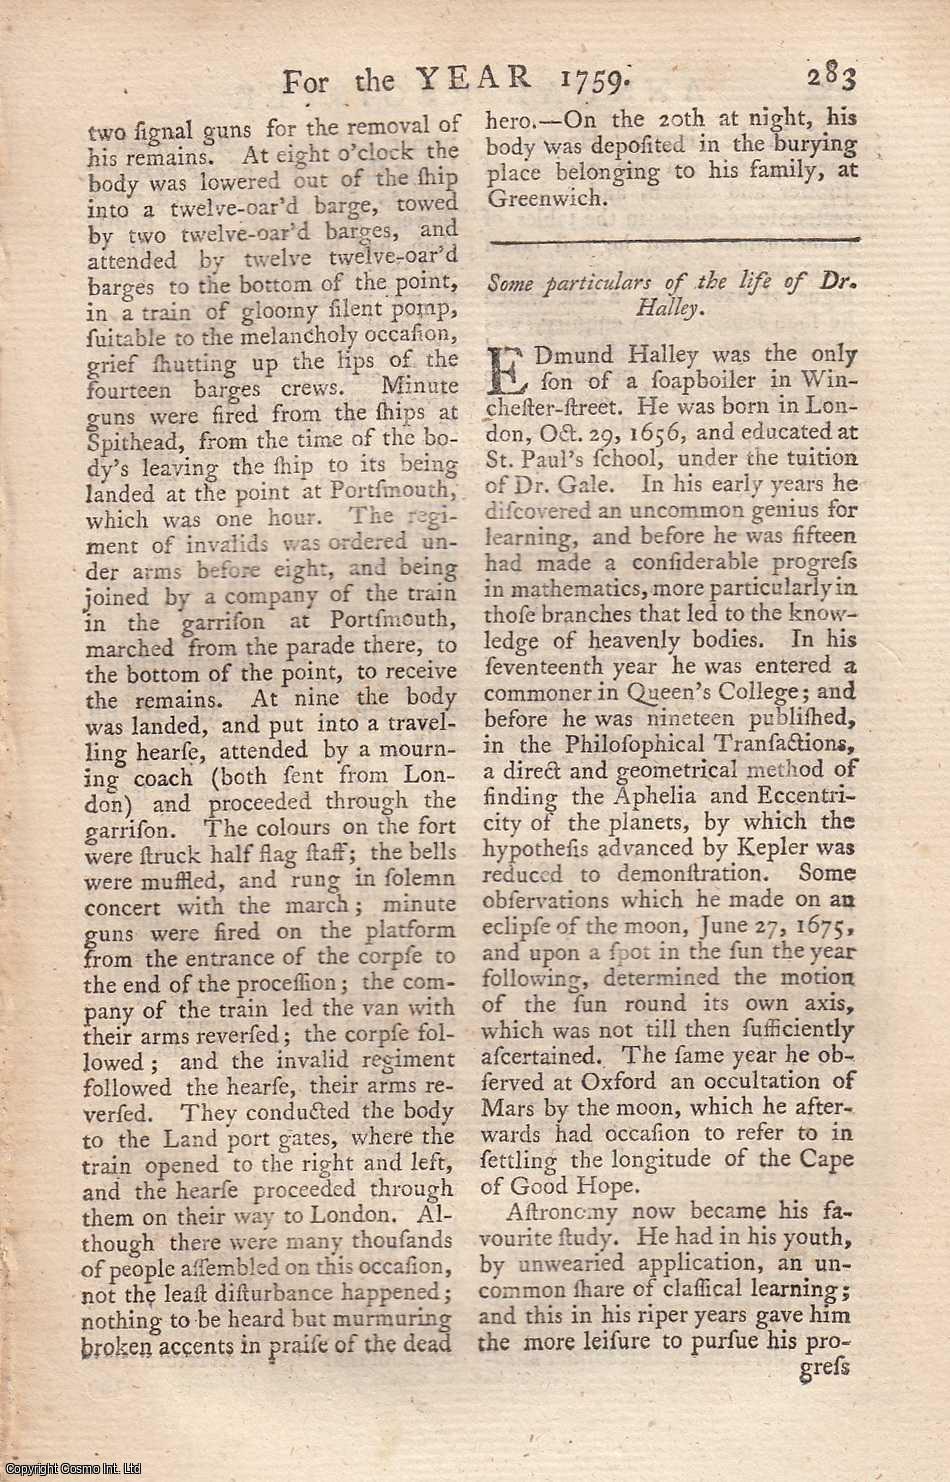 Edmund Burke - Some particulars of the life of Dr. [Edmund] Halley. An original article from the Annual Register for 1759.